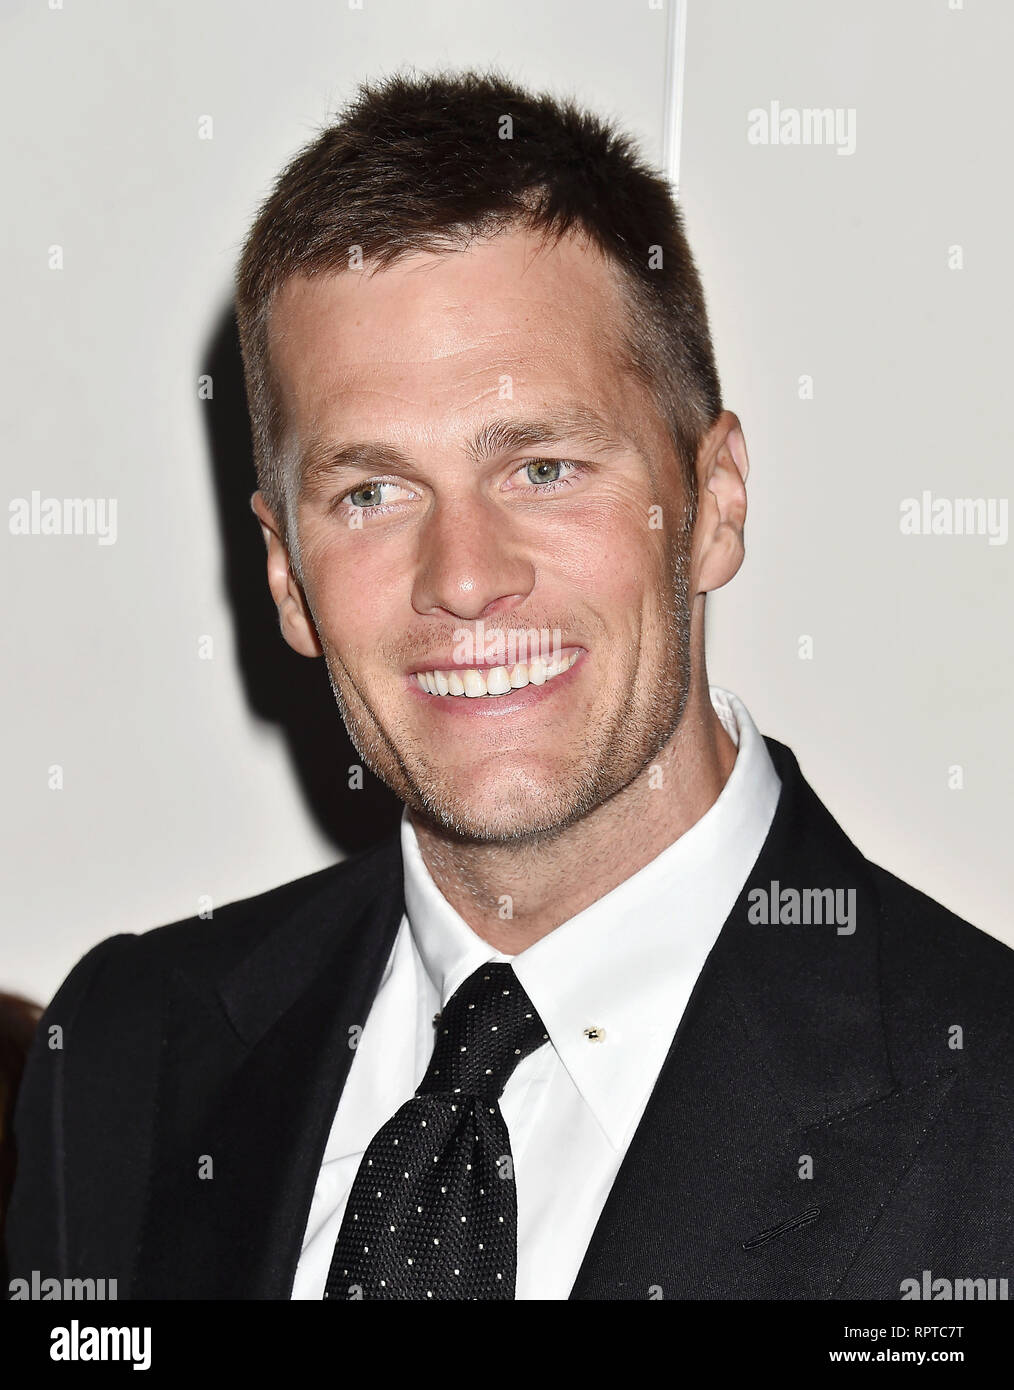 LOS ANGELES, CA - FEBRUARY 21: Tom Brady arrives at the Hollywood For Science Gala at Private Residence on February 21, 2019 in Los Angeles, Californi Stock Photo